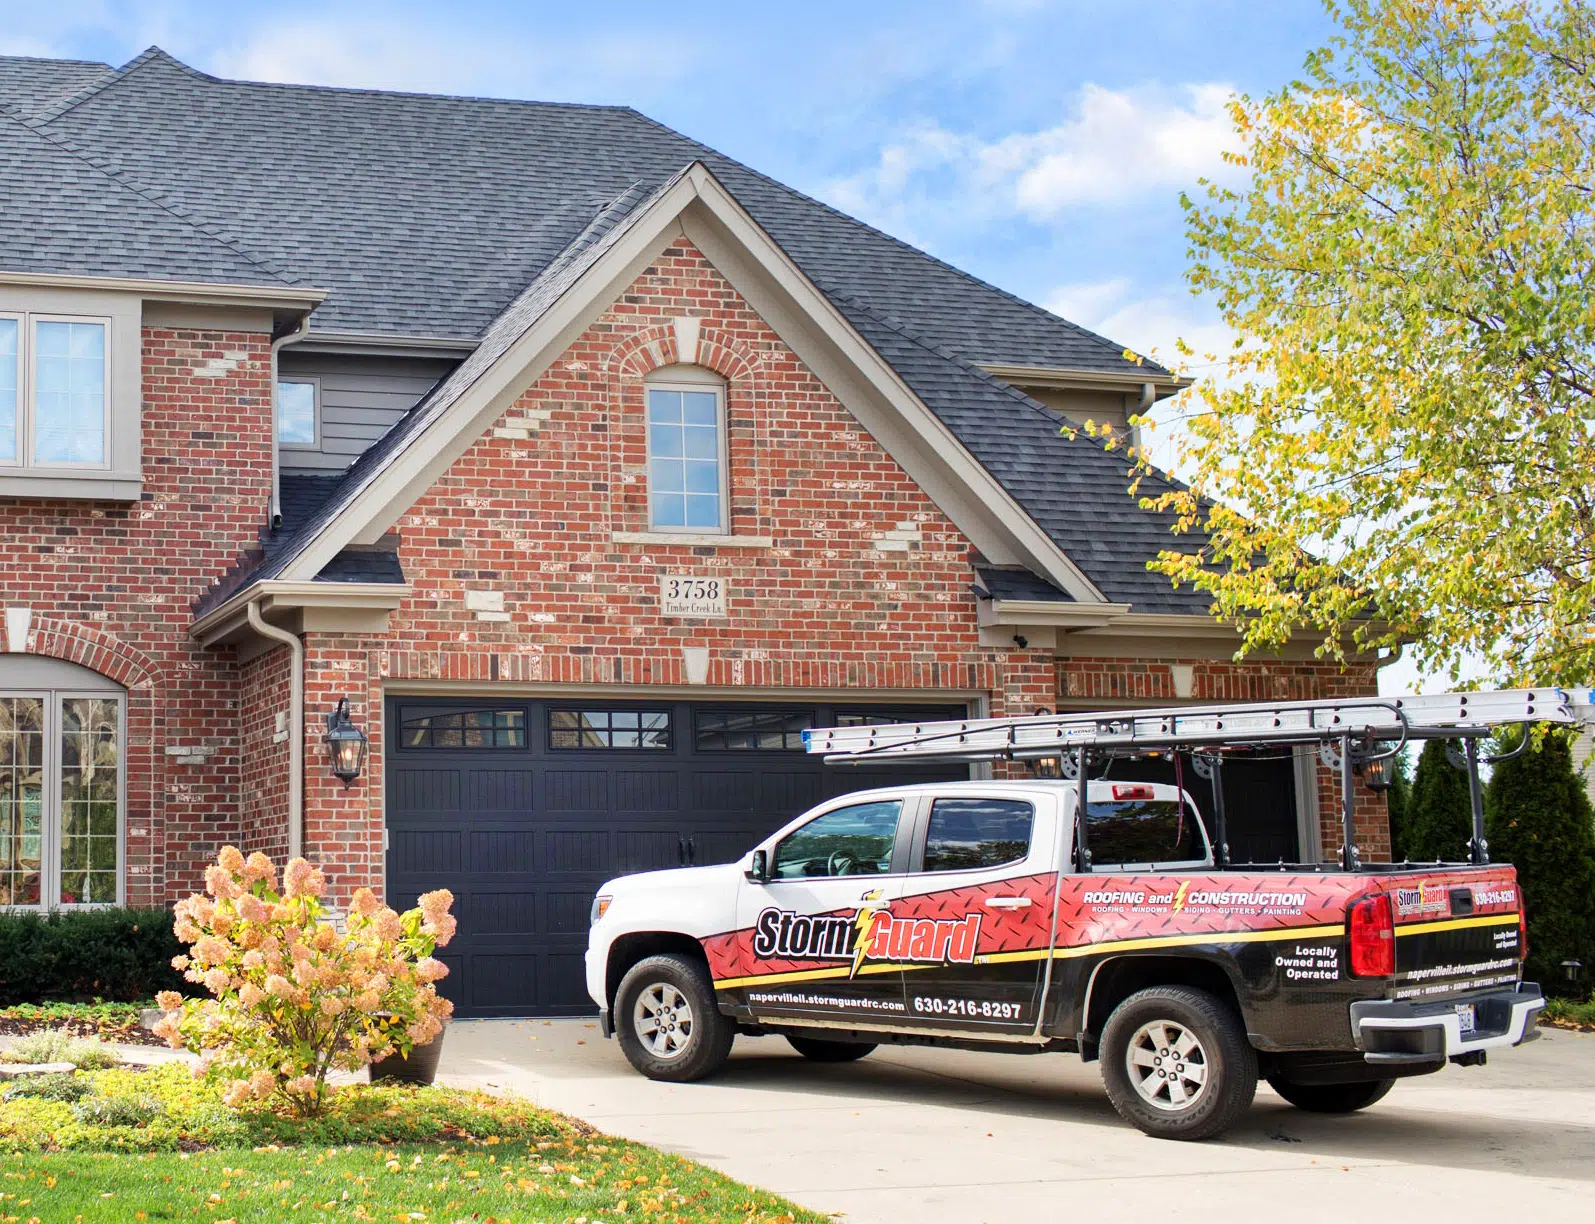 Brick House with Storm Guard Restoration Services Truck In Driveway - Chantilly-Dulles